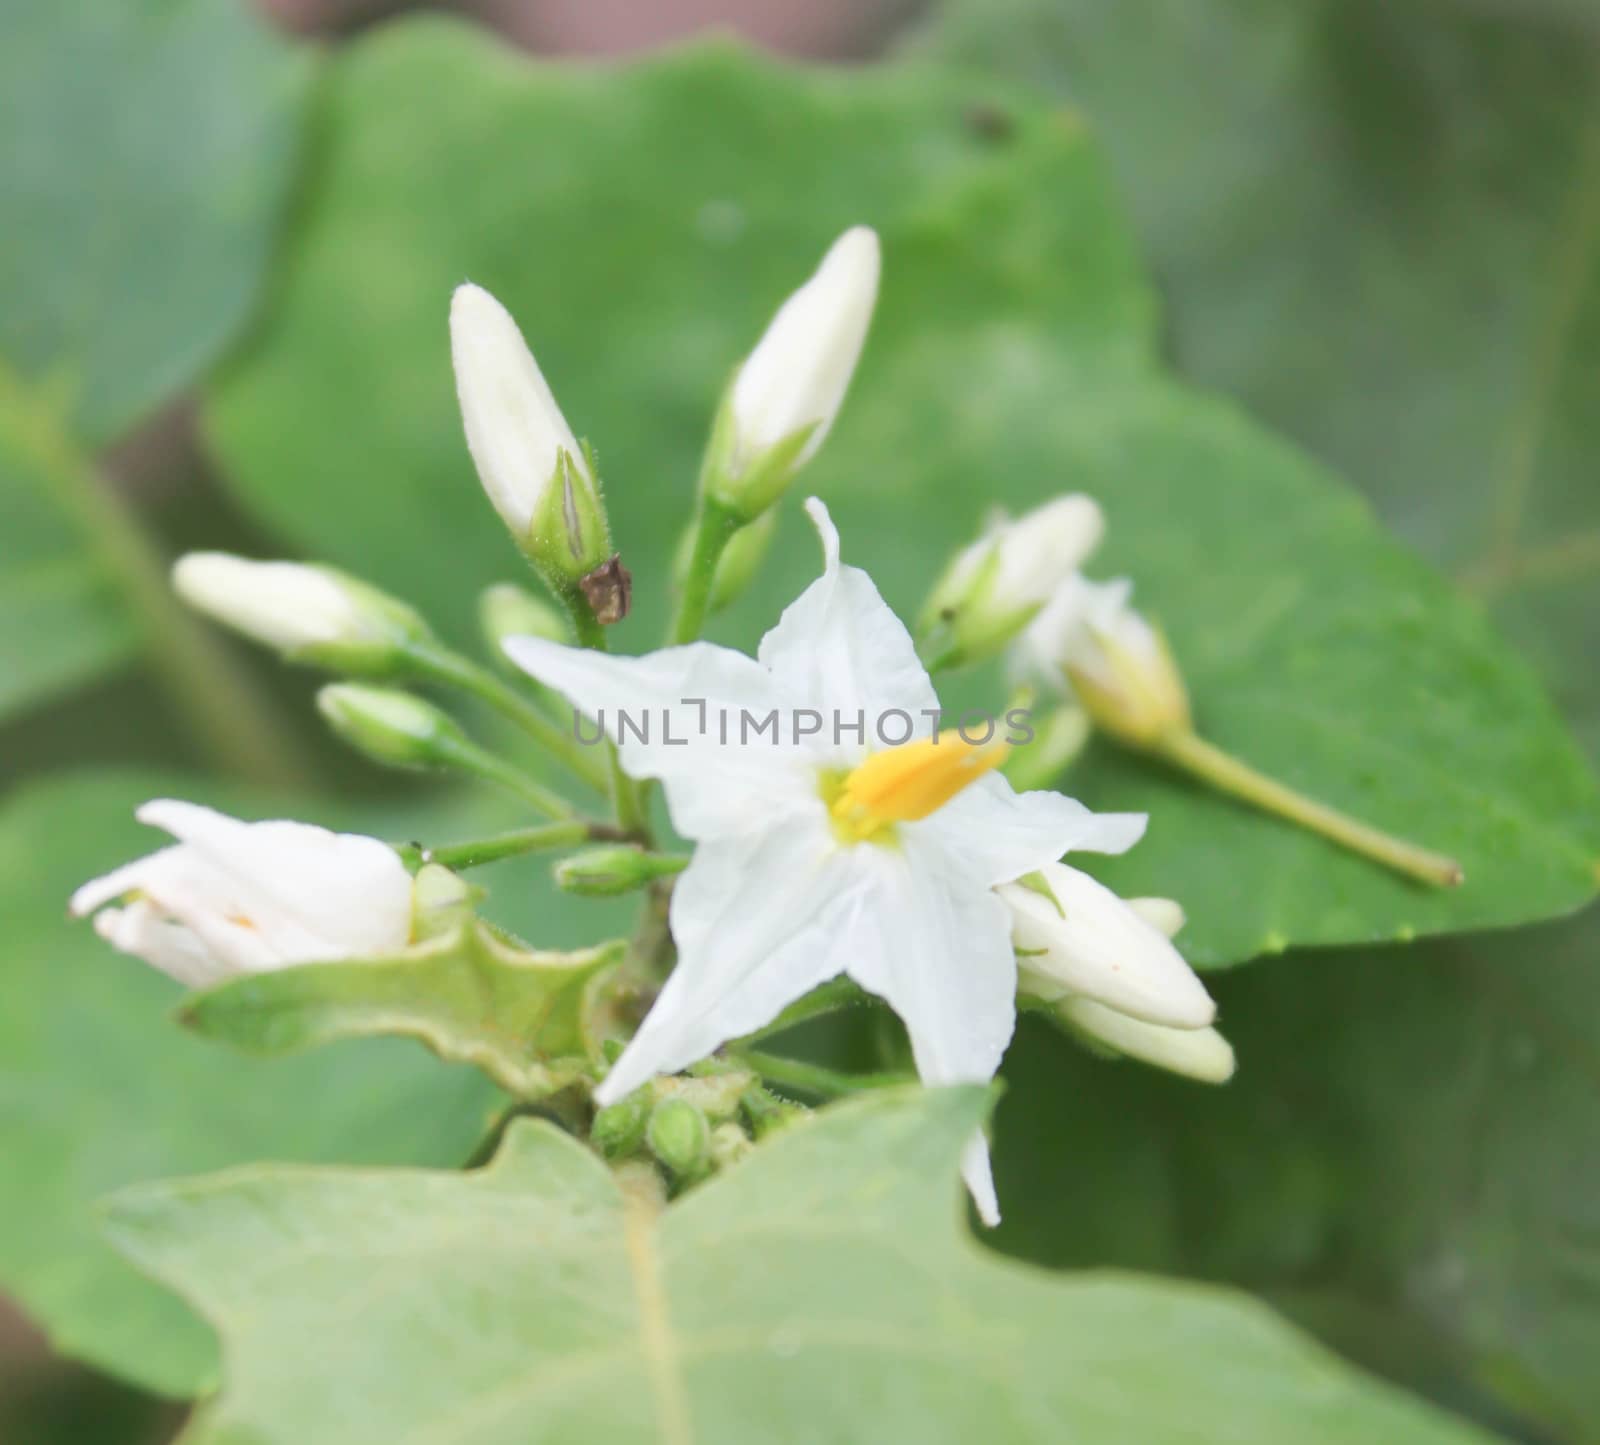 eggplant flower
White is a vegetable in Thailand.